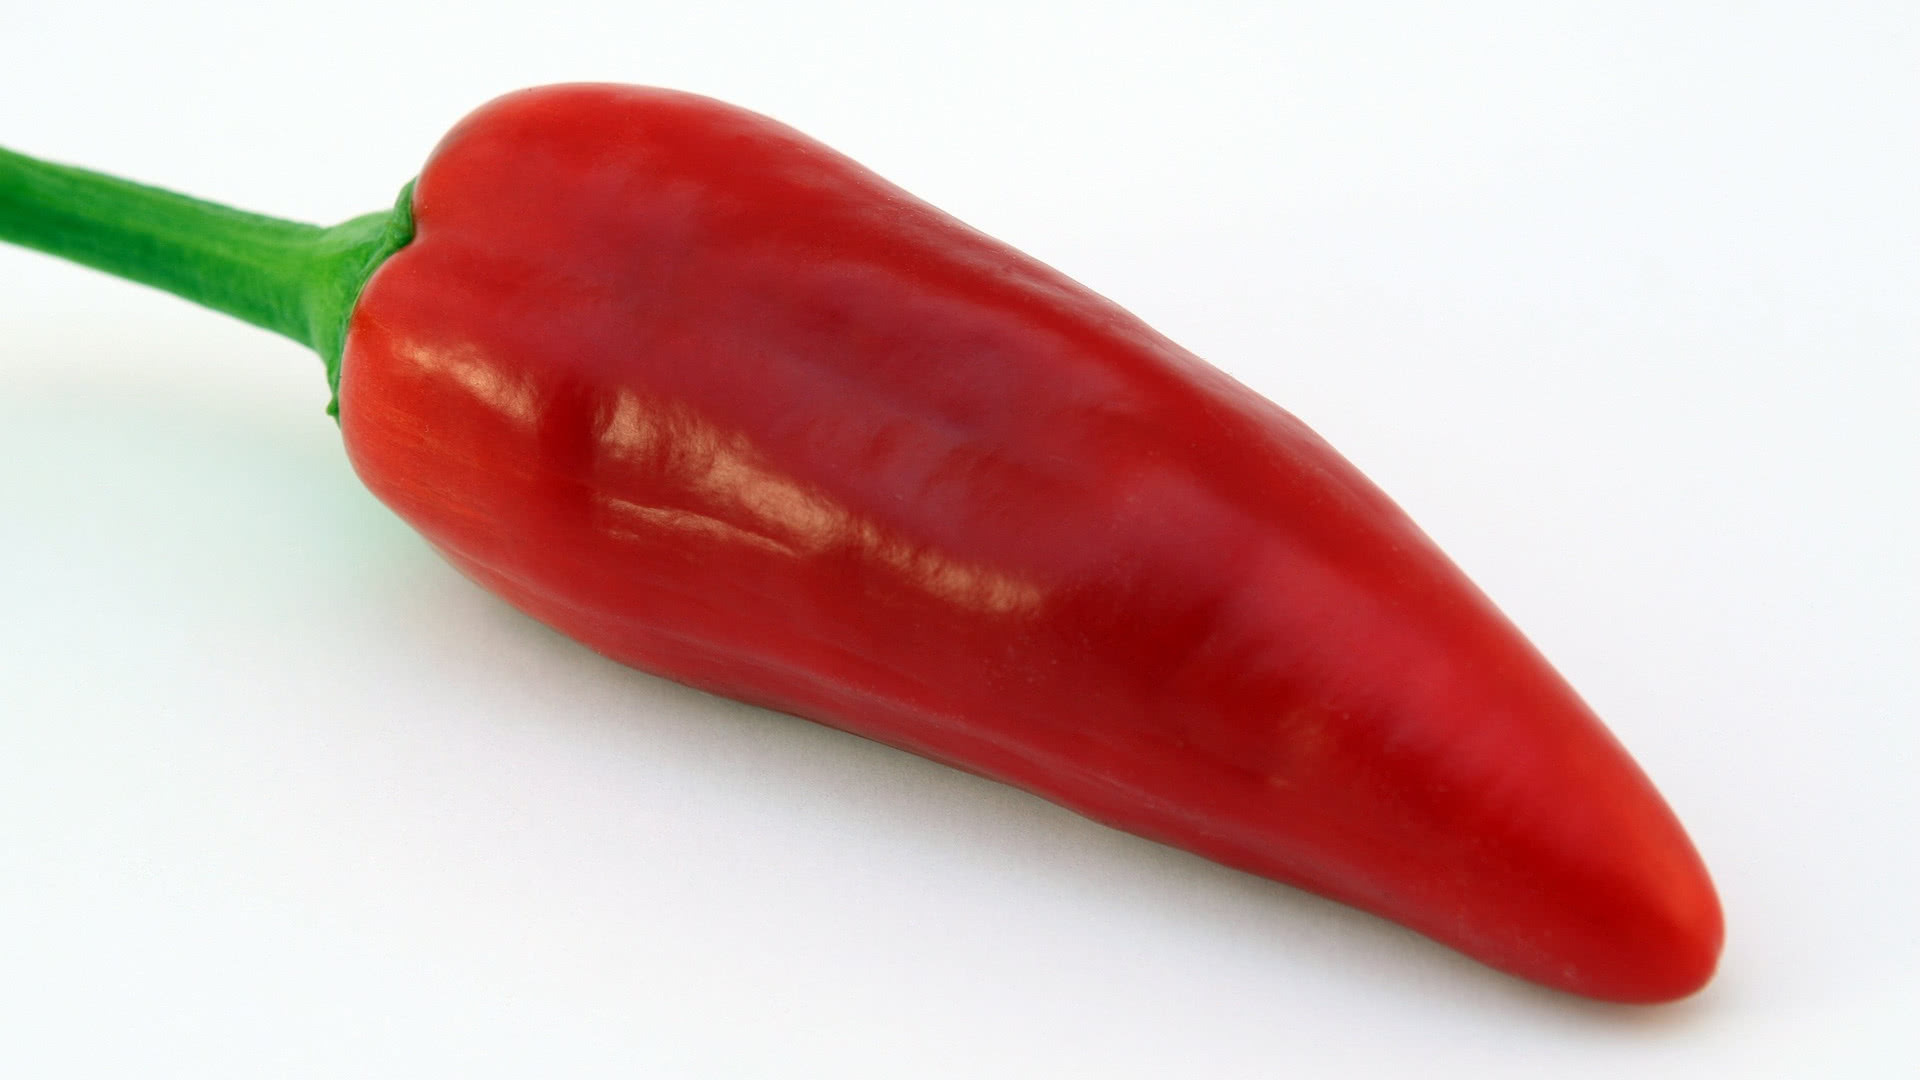 Jalapeno chili variety, Heat-packed peppers, Fiery flavors, Culinary delight, 1920x1080 Full HD Desktop